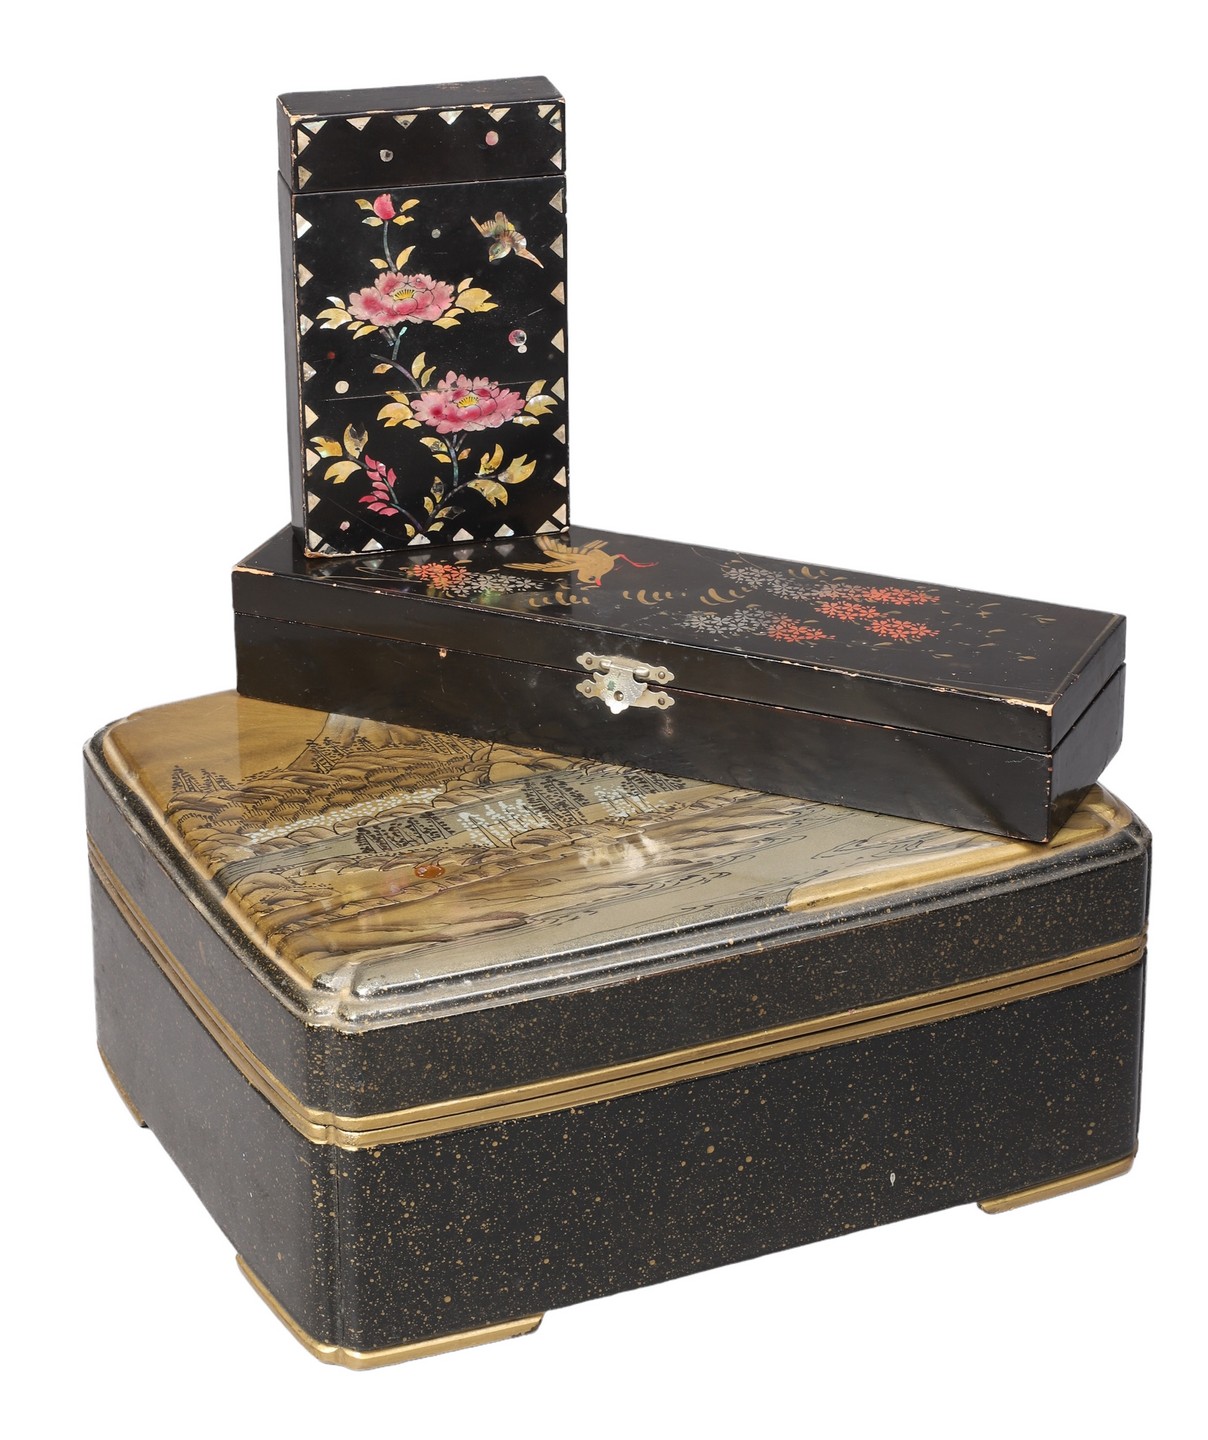 (3) Japanese lacquer boxes, c/o